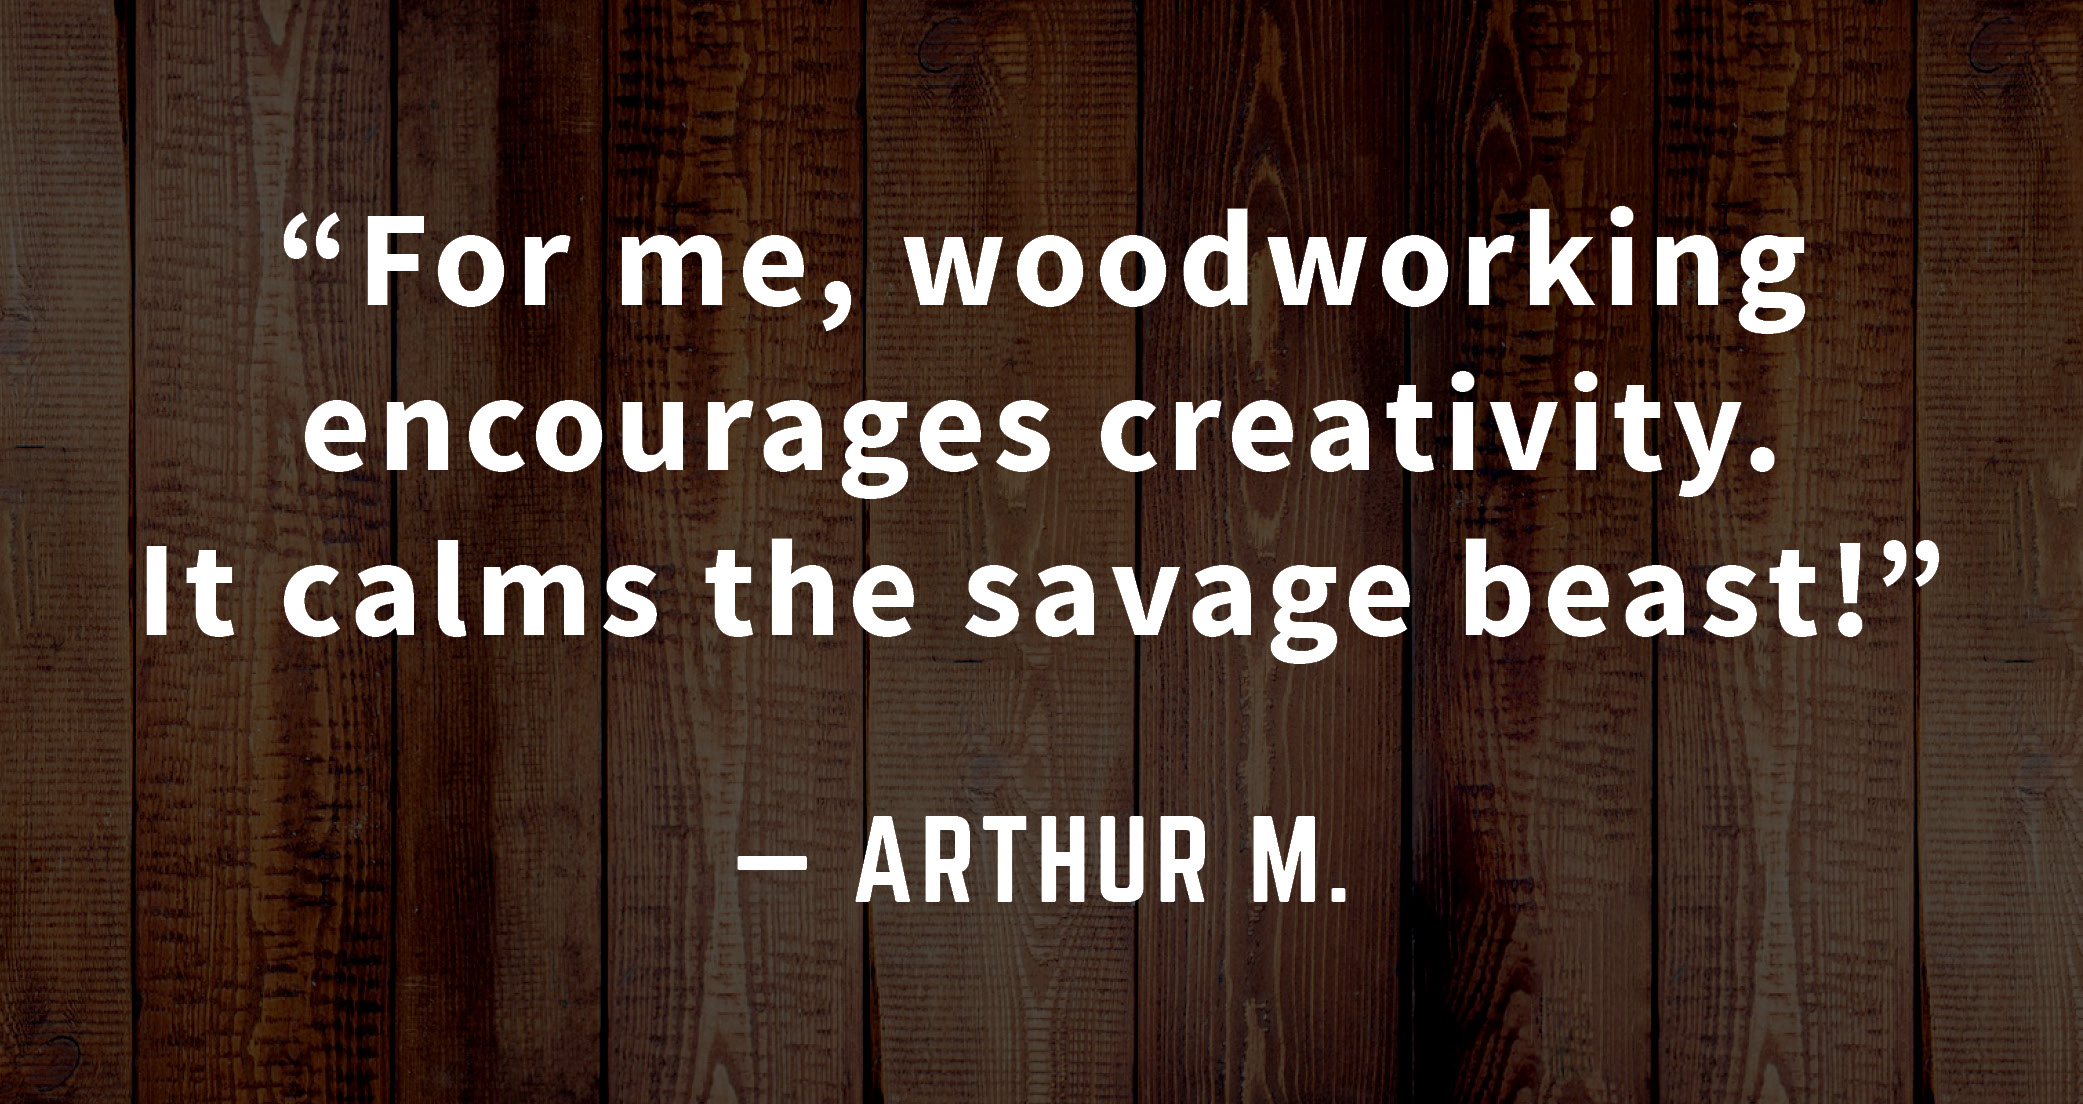 woodworking encourages creativity quote